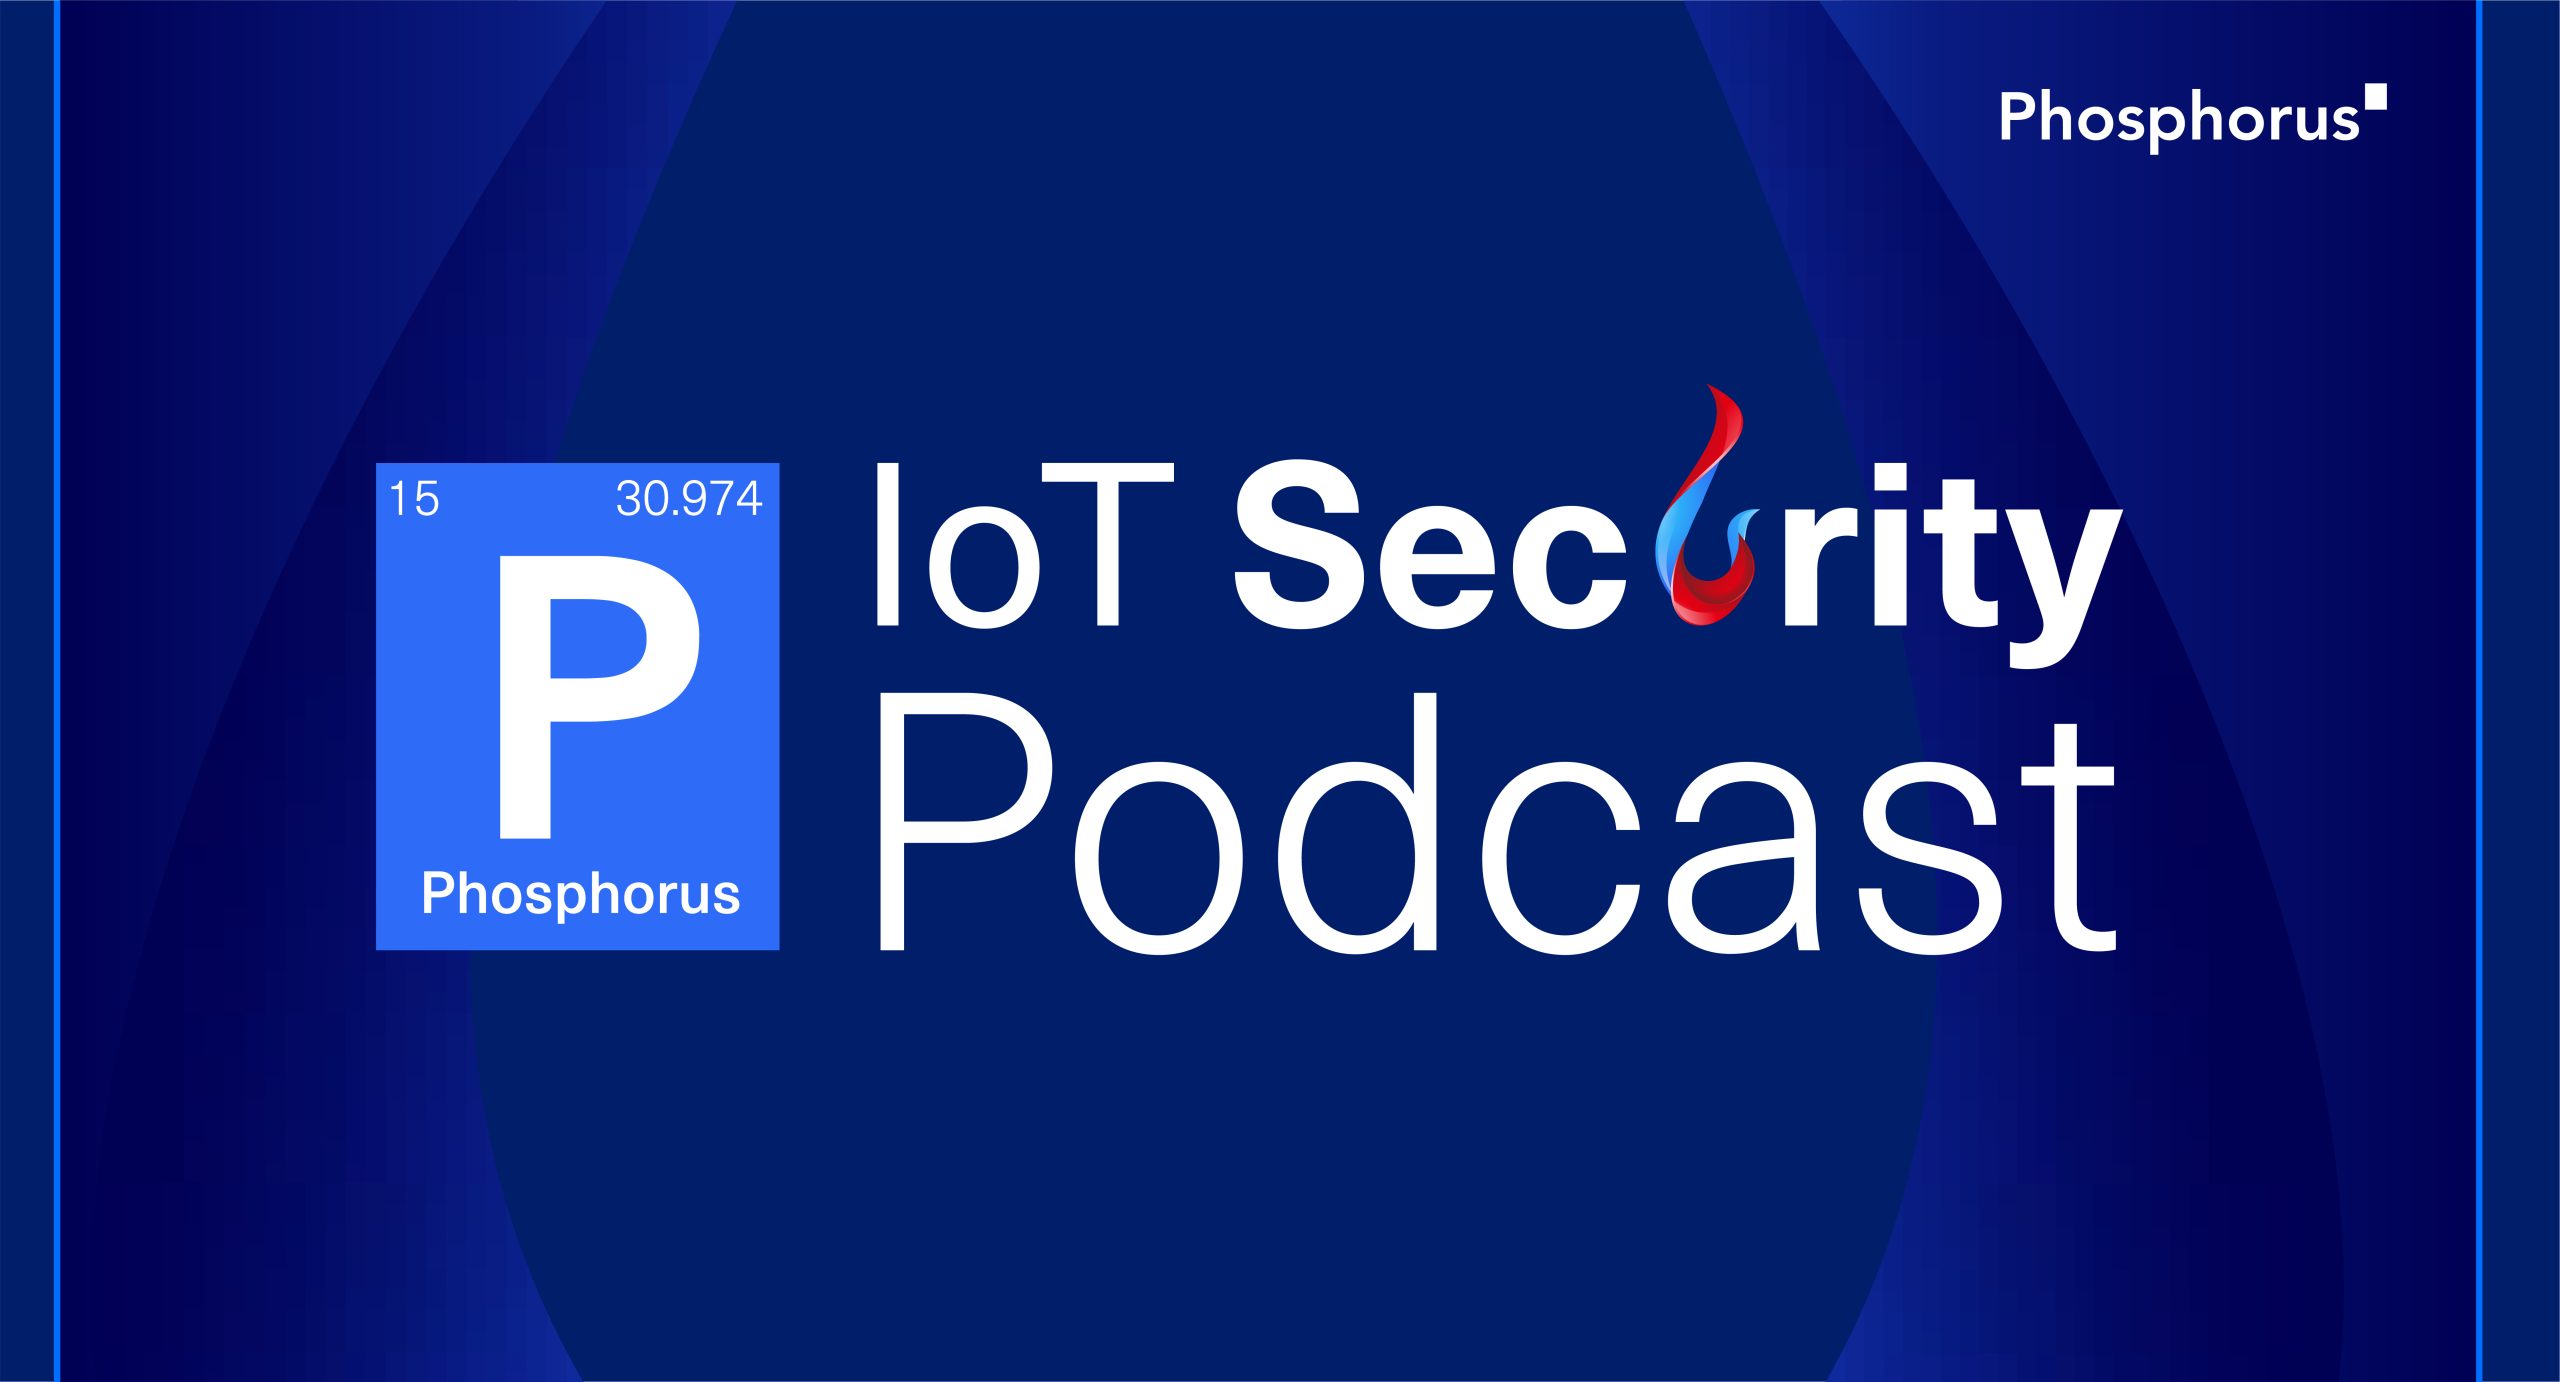 All-New “IoT Security Podcast” by Phosphorus Covers Bleeding Edge xIoT Security Issues with Top Industry Leaders and Experts